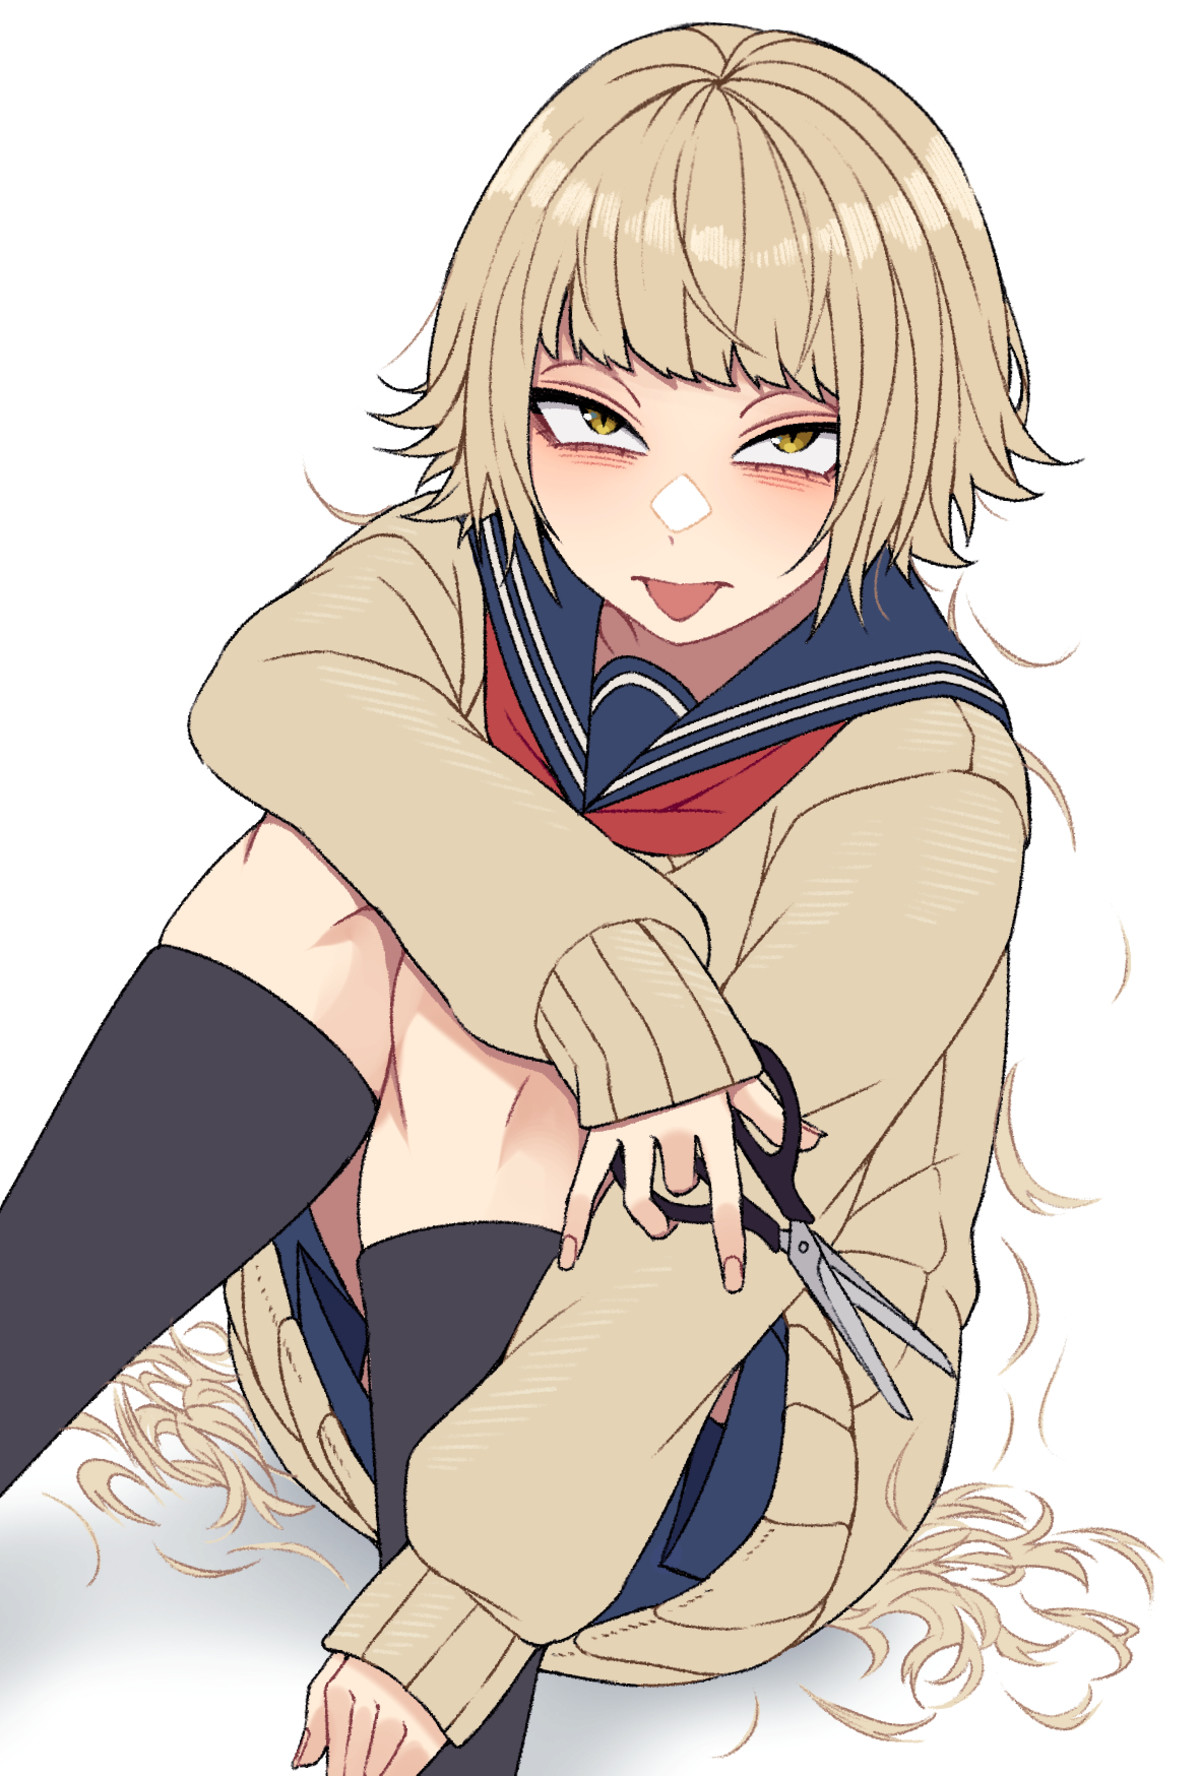 Daily Toga - 913: Toga's New Hair. join list: DailyToga (477 subs)Mention History Source: linGT/status/1484222863221551106 .. Still cute af